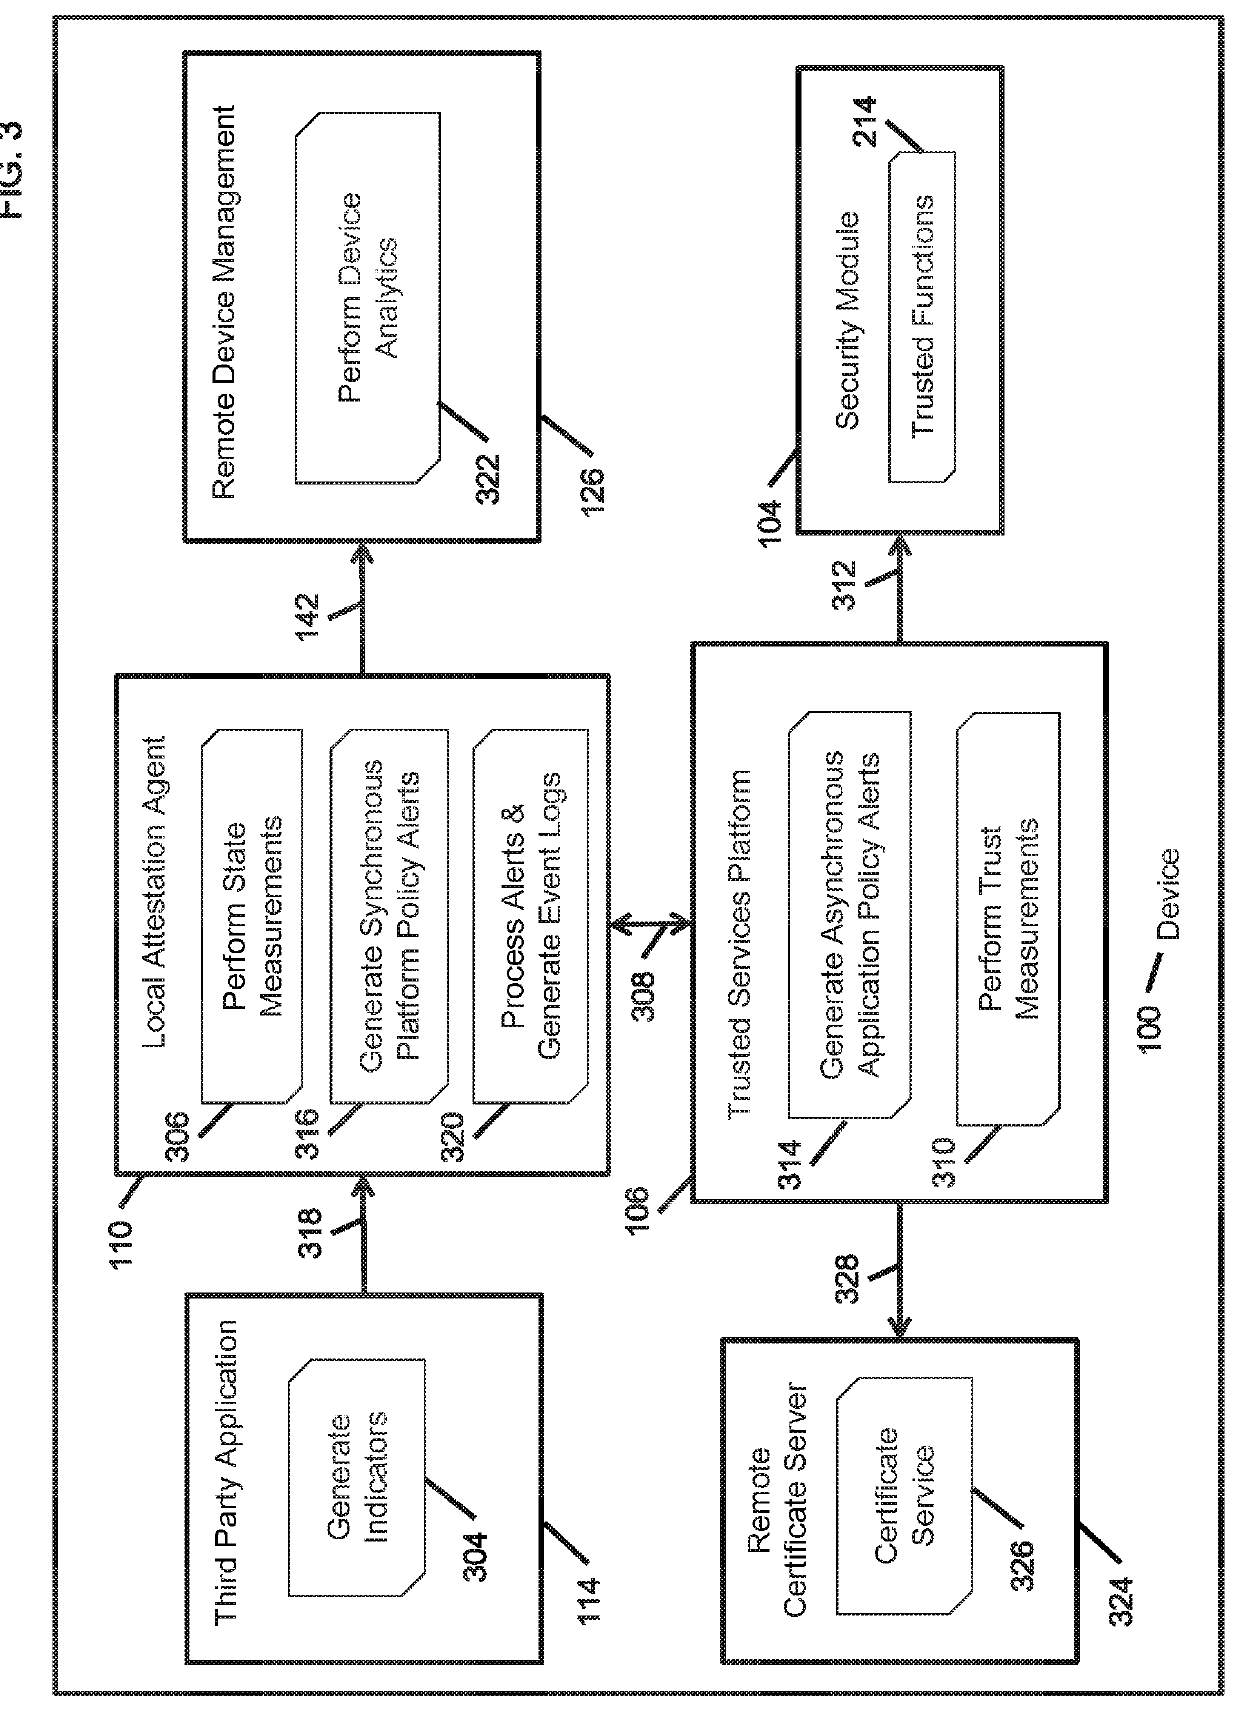 System and method for policy based adaptive application capability management and device attestation